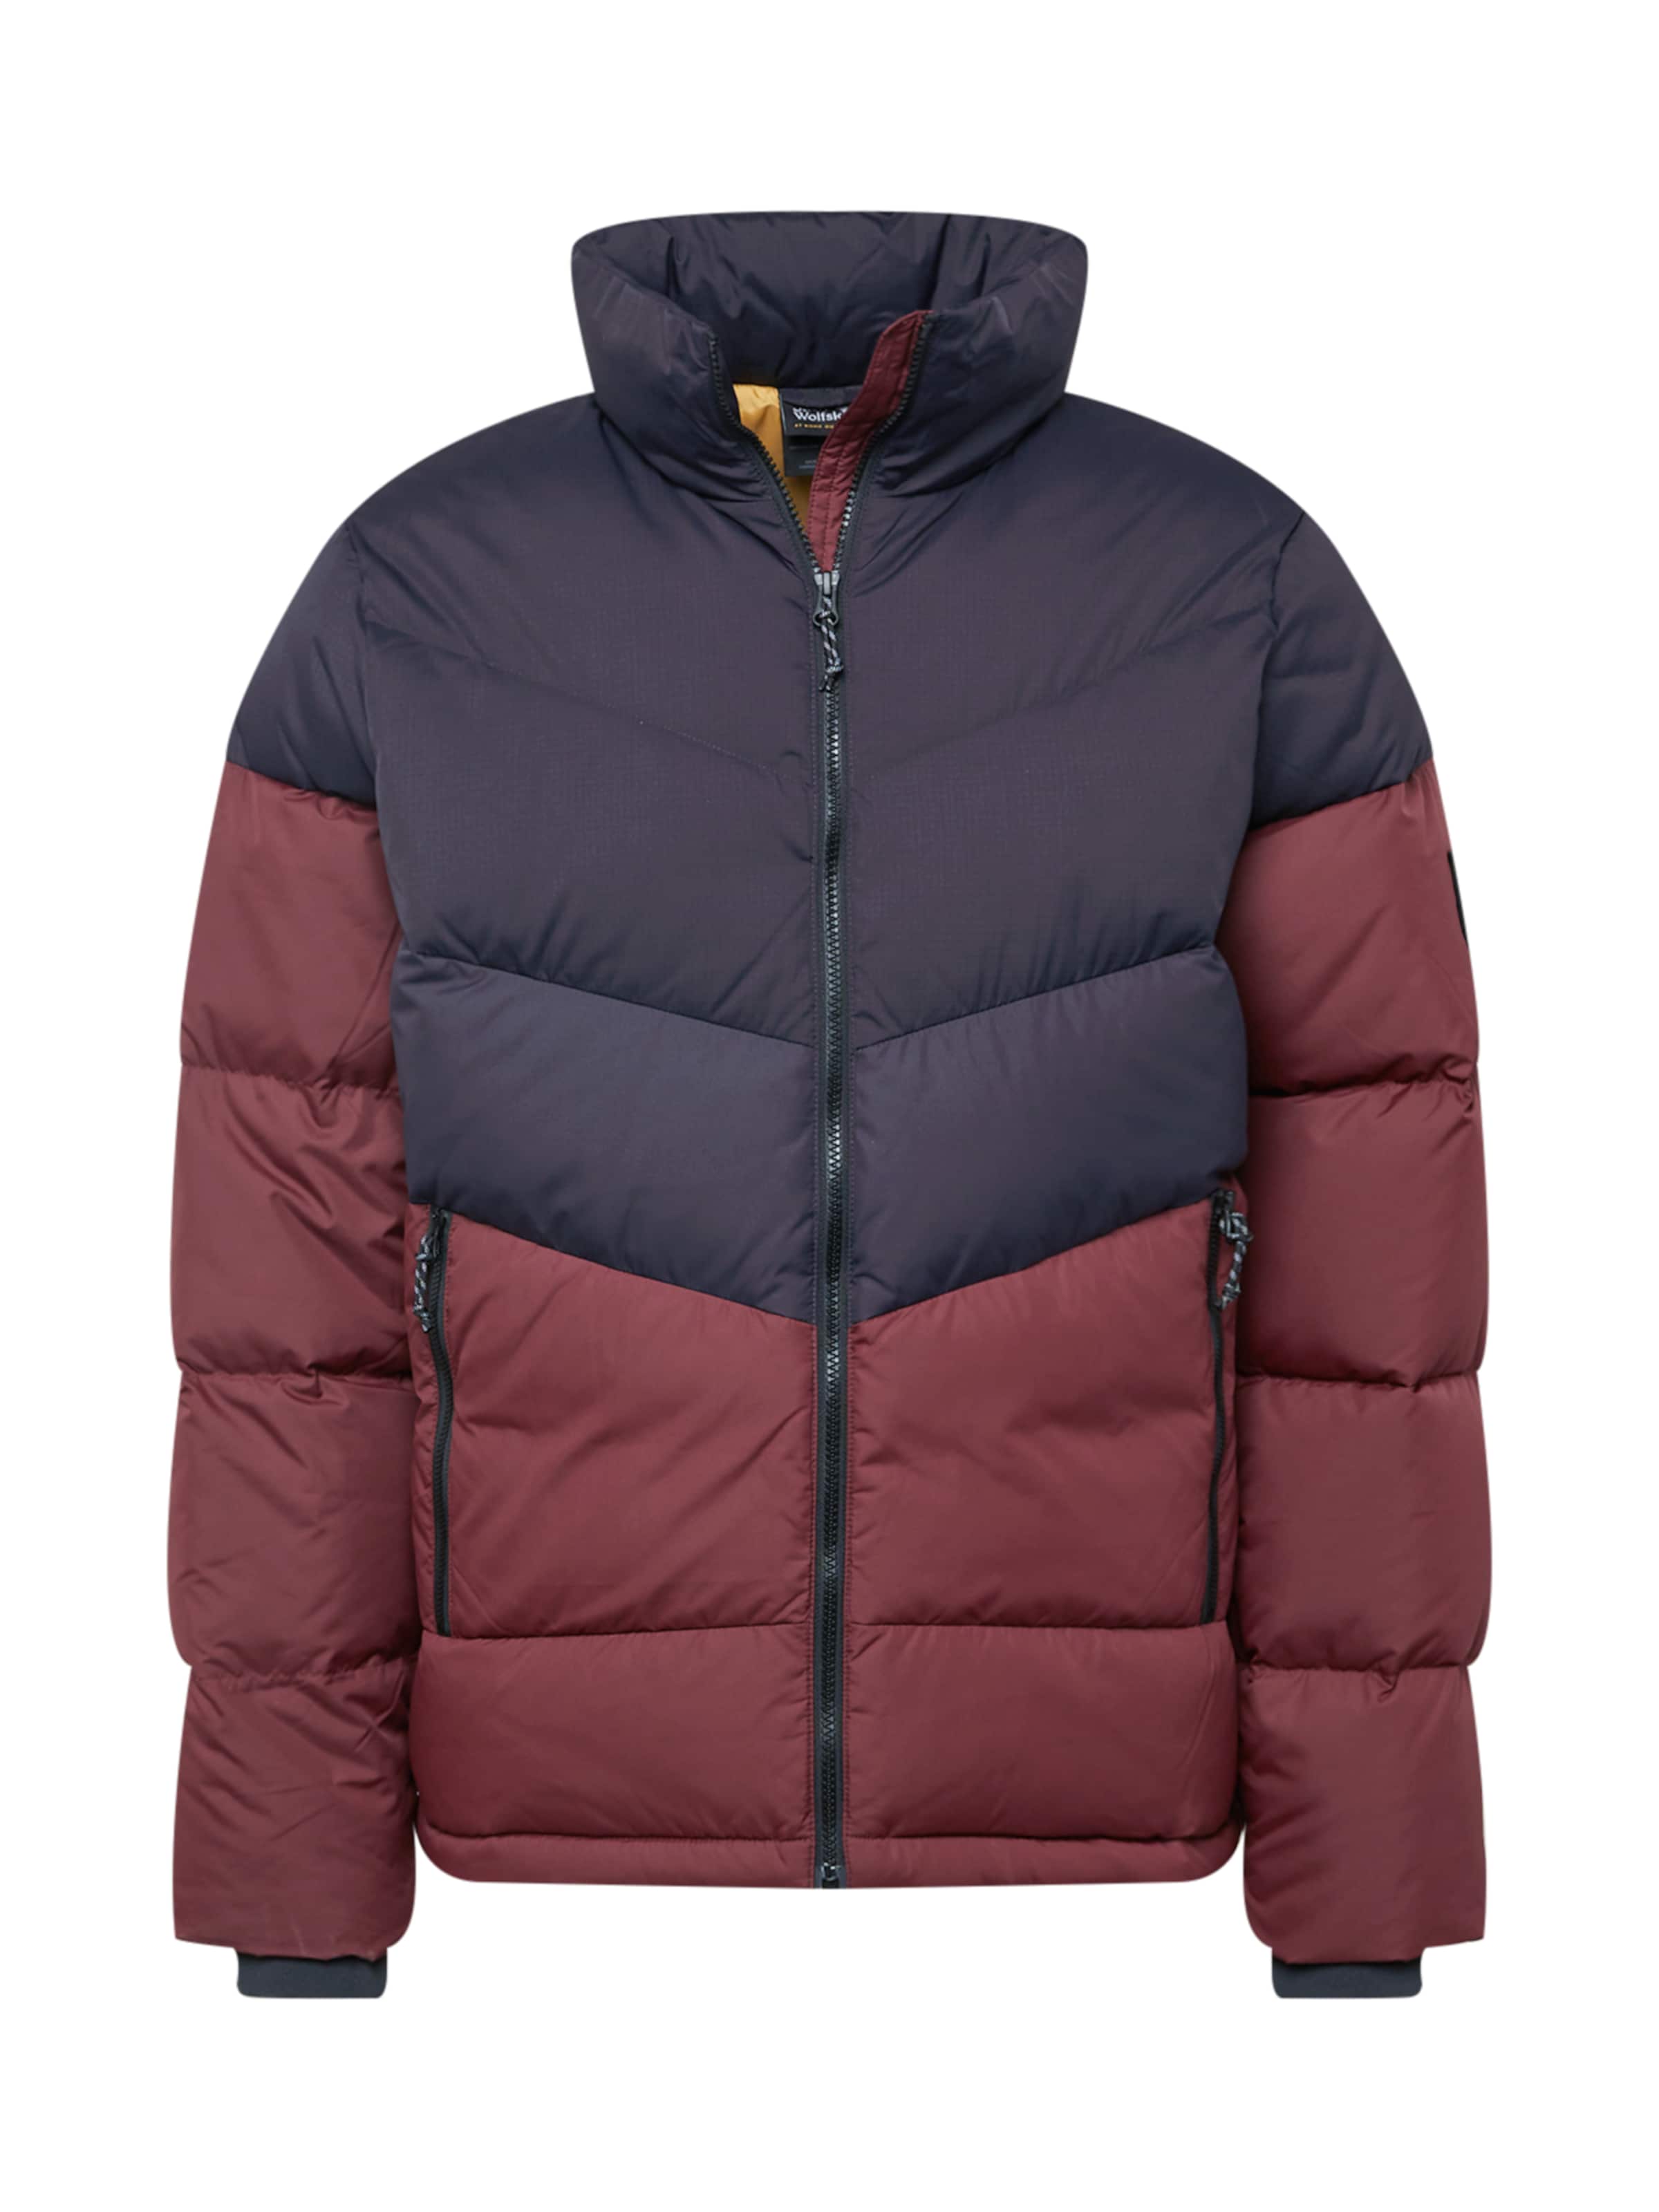 Giacche Abbigliamento JACK WOLFSKIN Giacca invernale Fearless in Rosso Scuro 